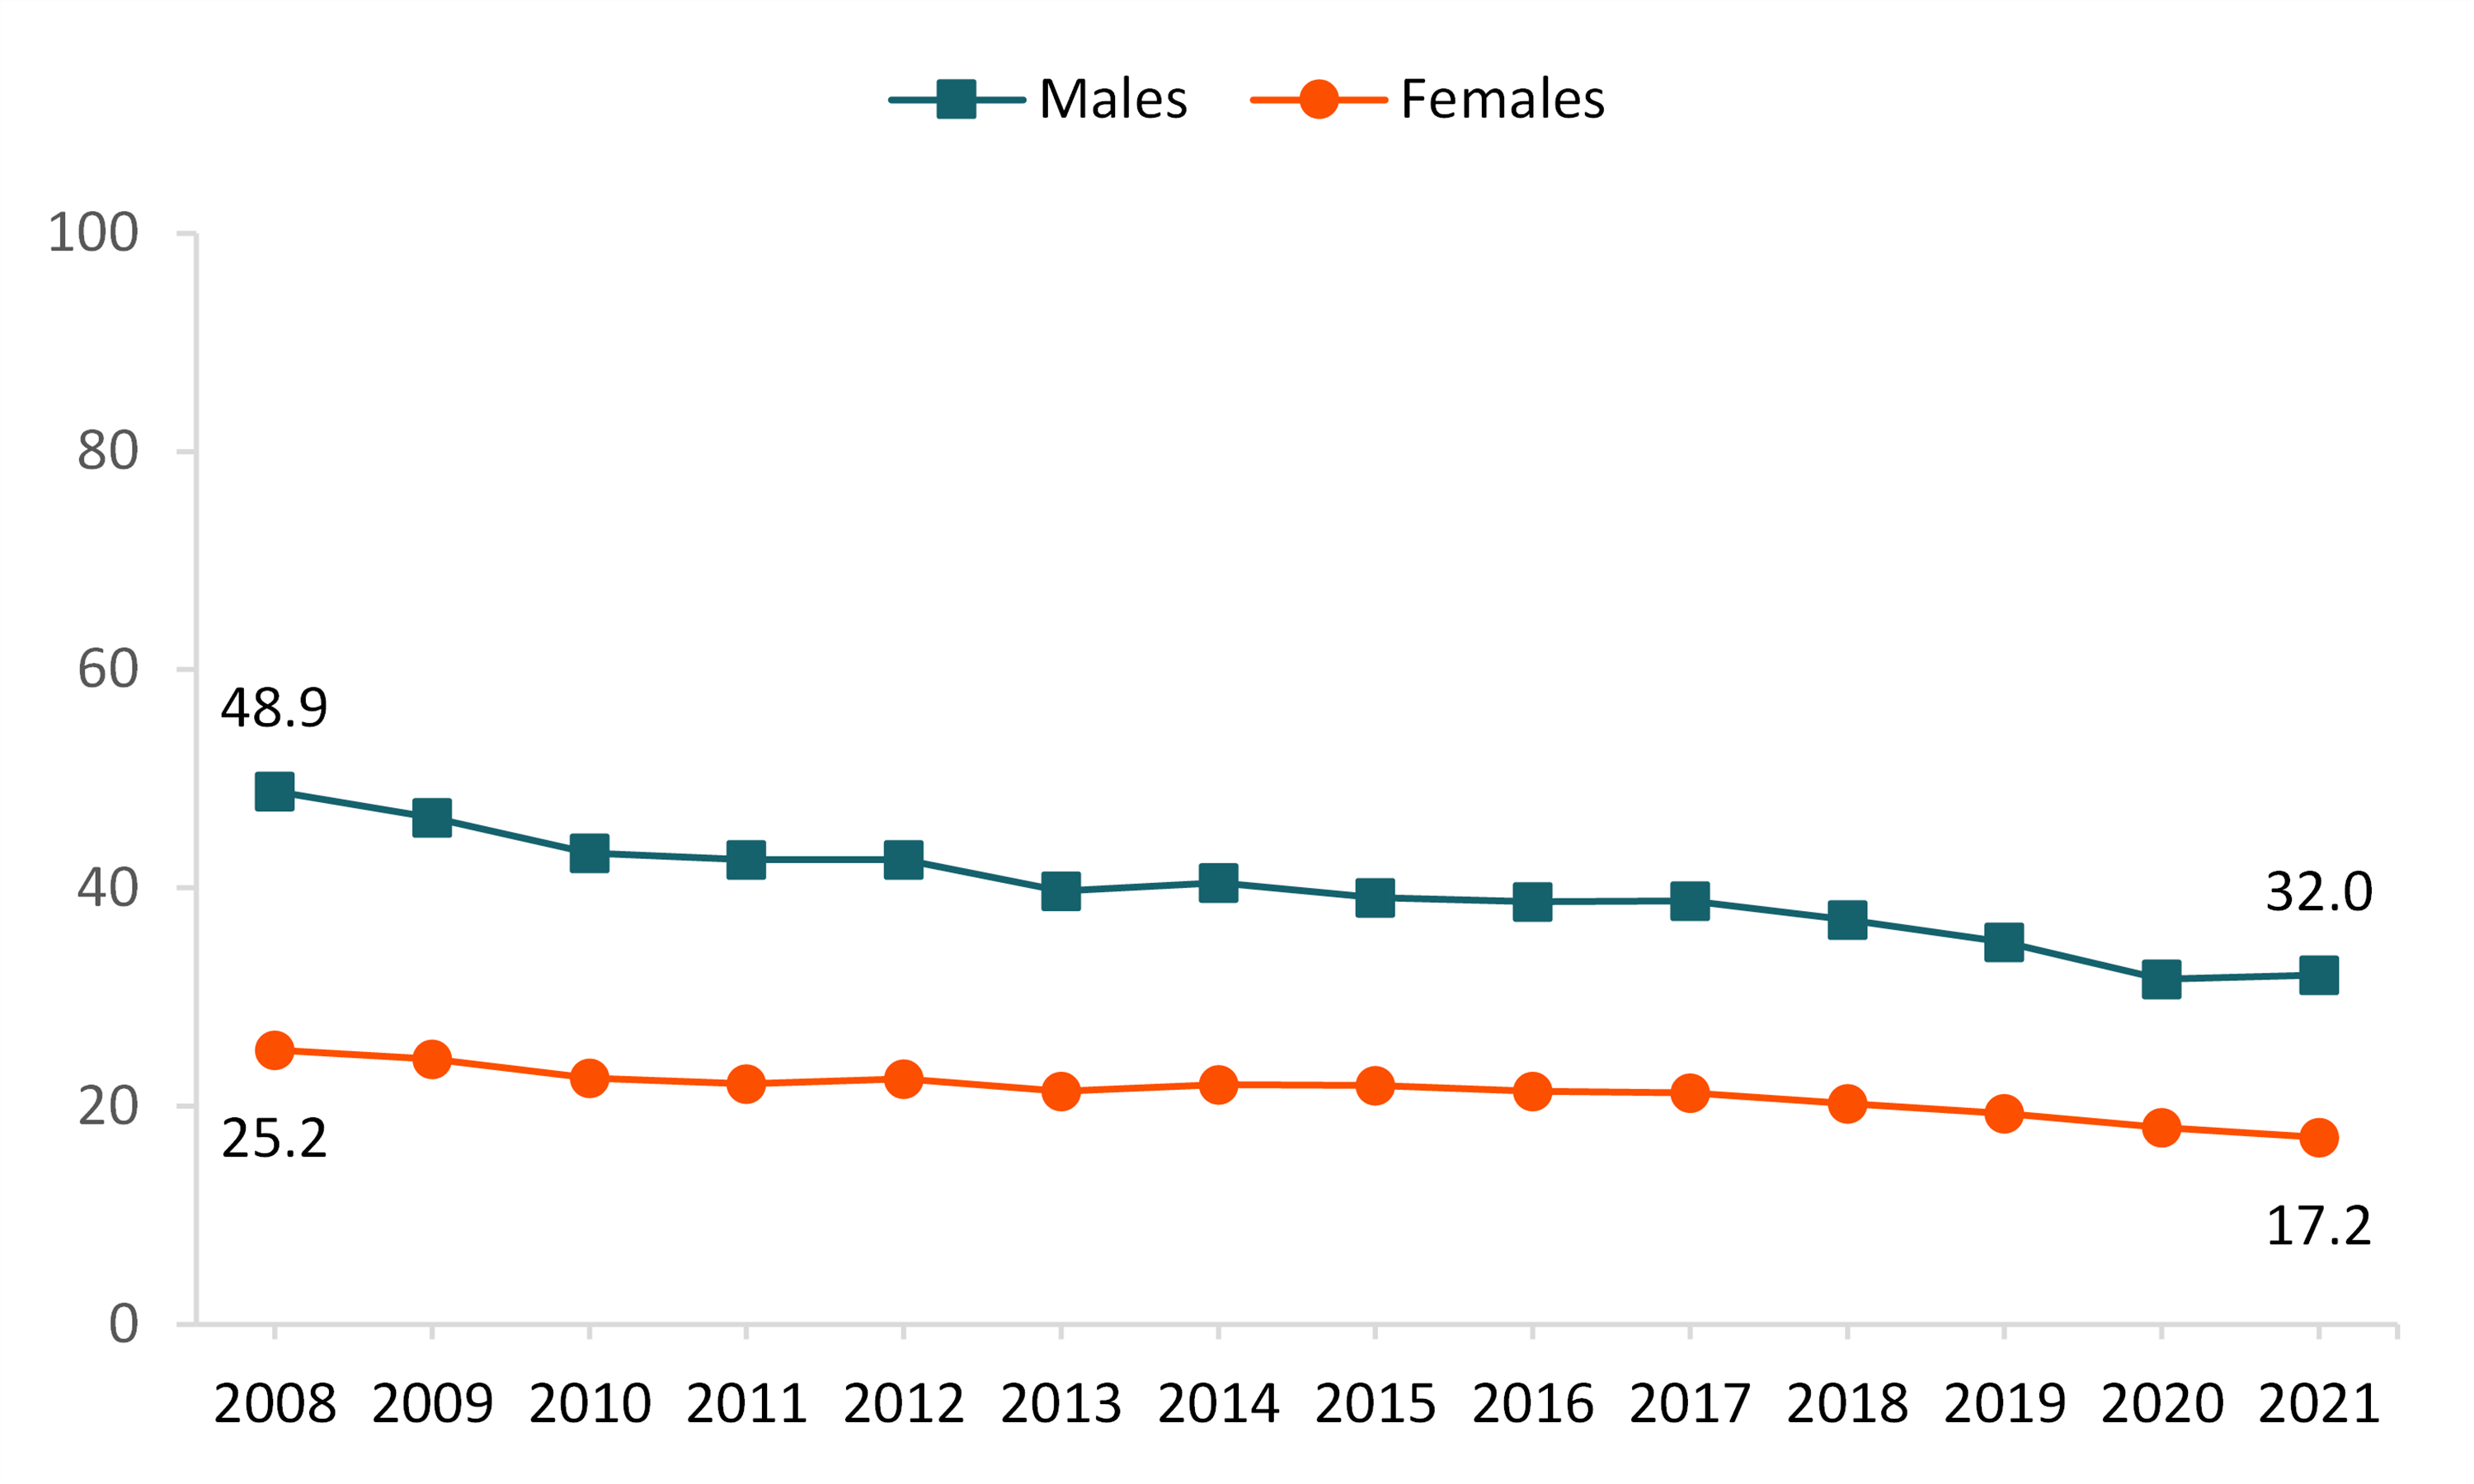 graph showing Figure 1. Remarriage Rate for Males and Females, 2008–2021